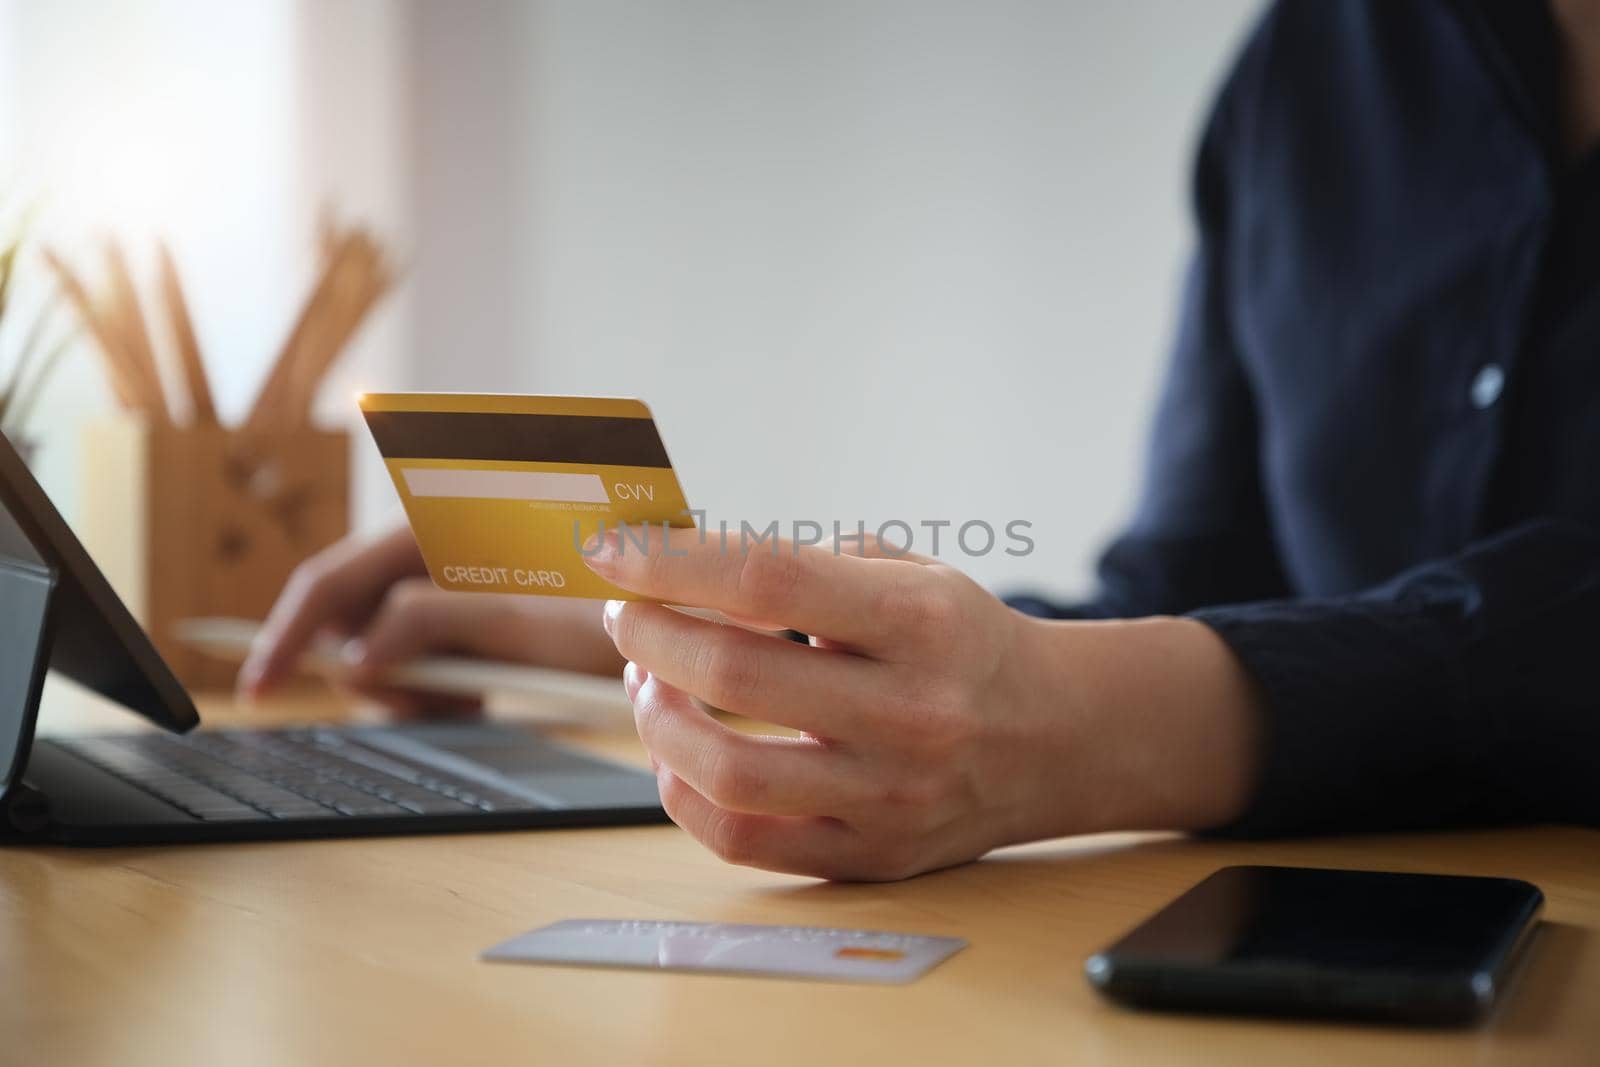 Online payment, Young Women's hands holding credit card and using tablet for online shopping